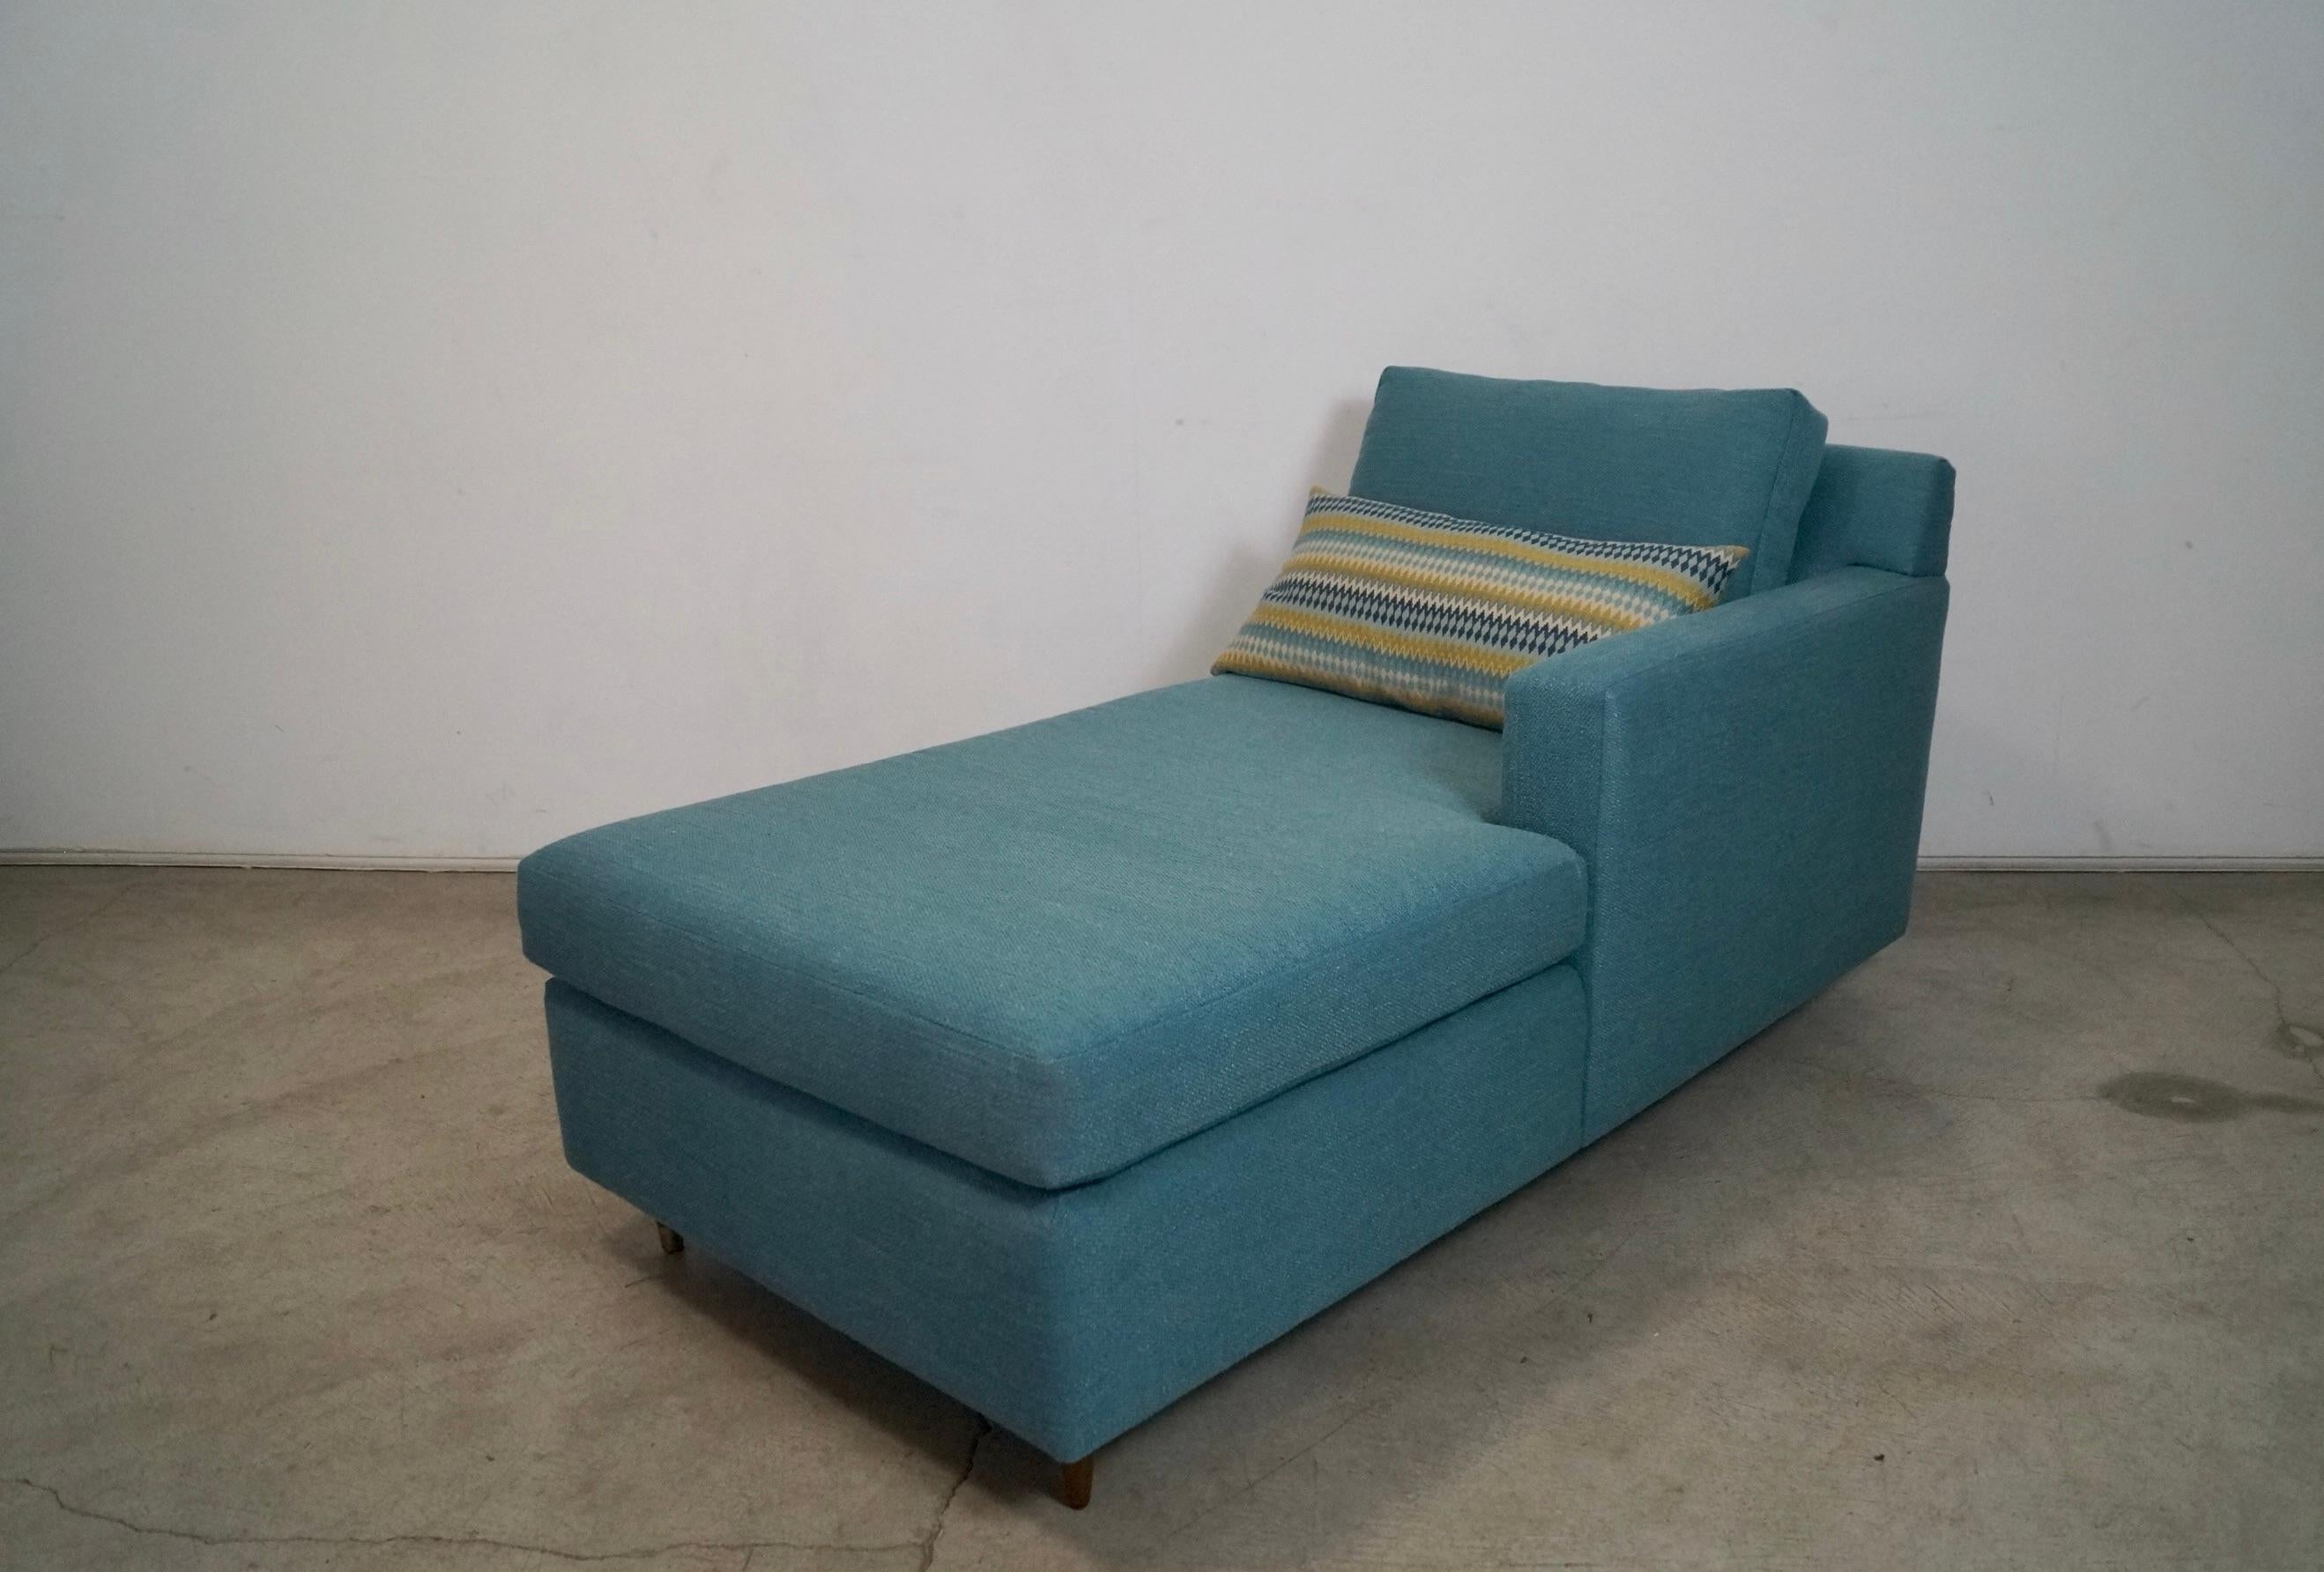 1970's Mid-Century Modern Single Arm Reupholstered Chaise Lounge Daybed For Sale 1